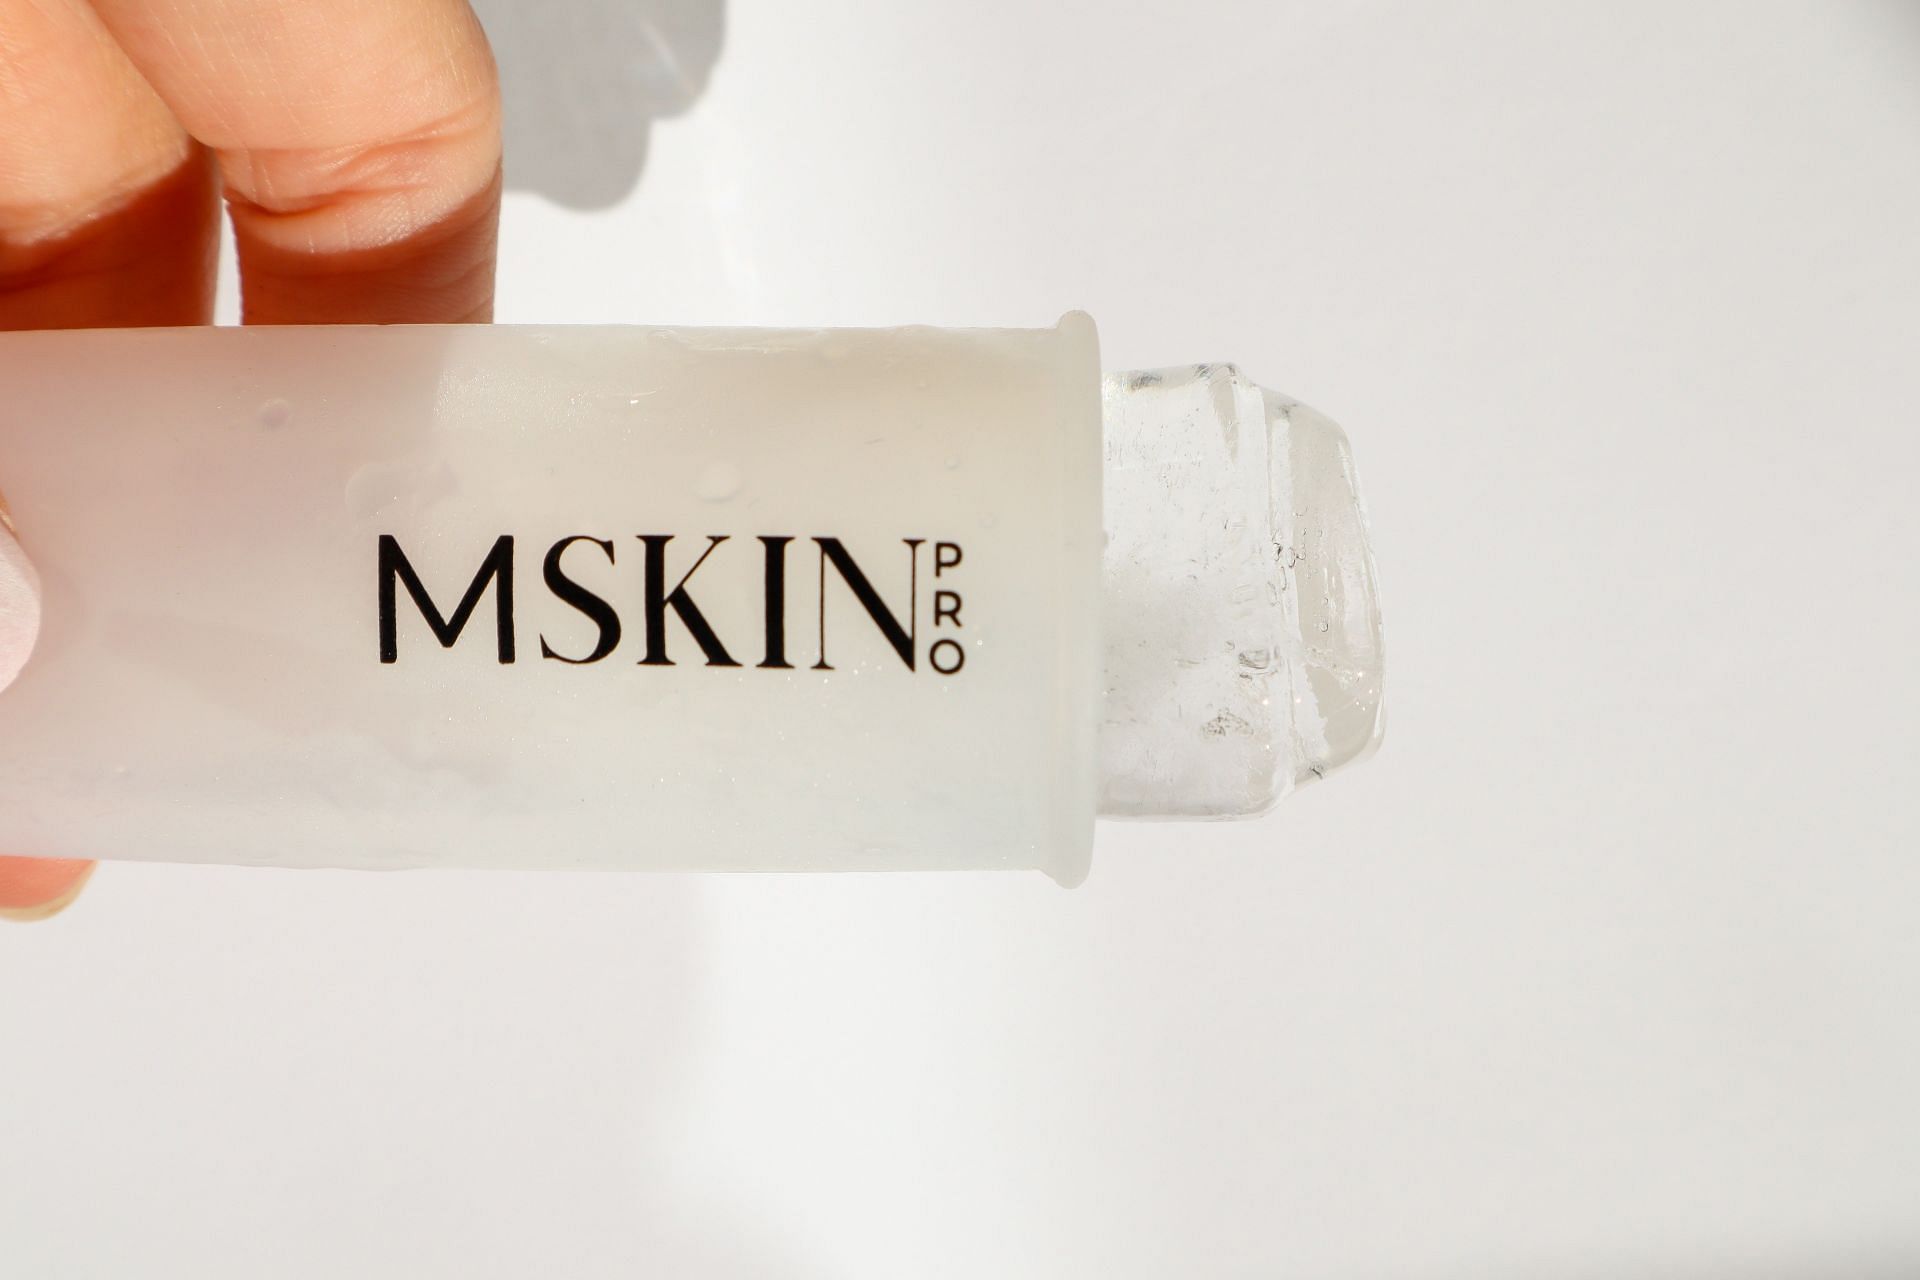 Applying ice to the affected area can also help reduce inflammation and numb the area, which can provide pain relief (Photo by MSKIN Pro/pexels)